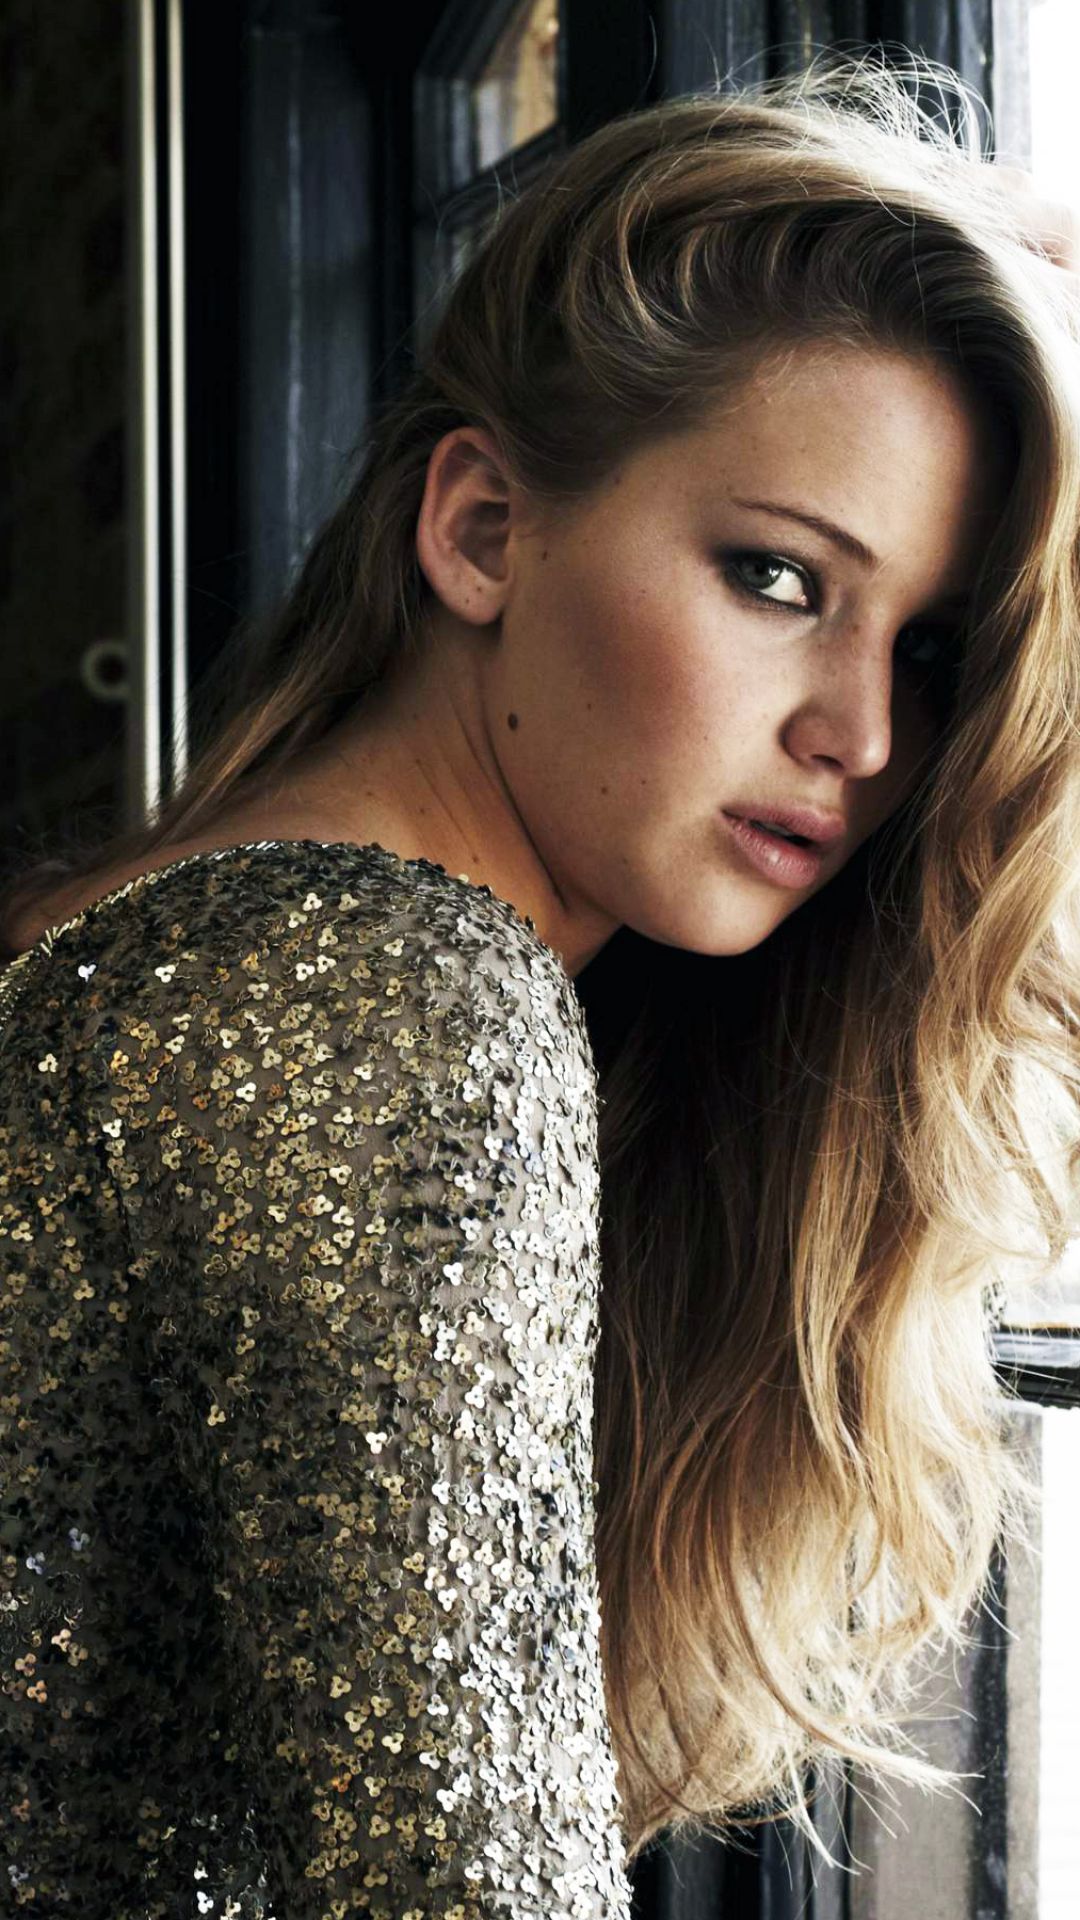 Jennifer Lawrence wallpaper for iPhone with resolution 1080x1920 pixel. You can make this wallpaper for your iPhone 5, 6, 7, 8, X backgrounds, Mobile Screensaver, or iPad Lock Screen - Jennifer Lawrence